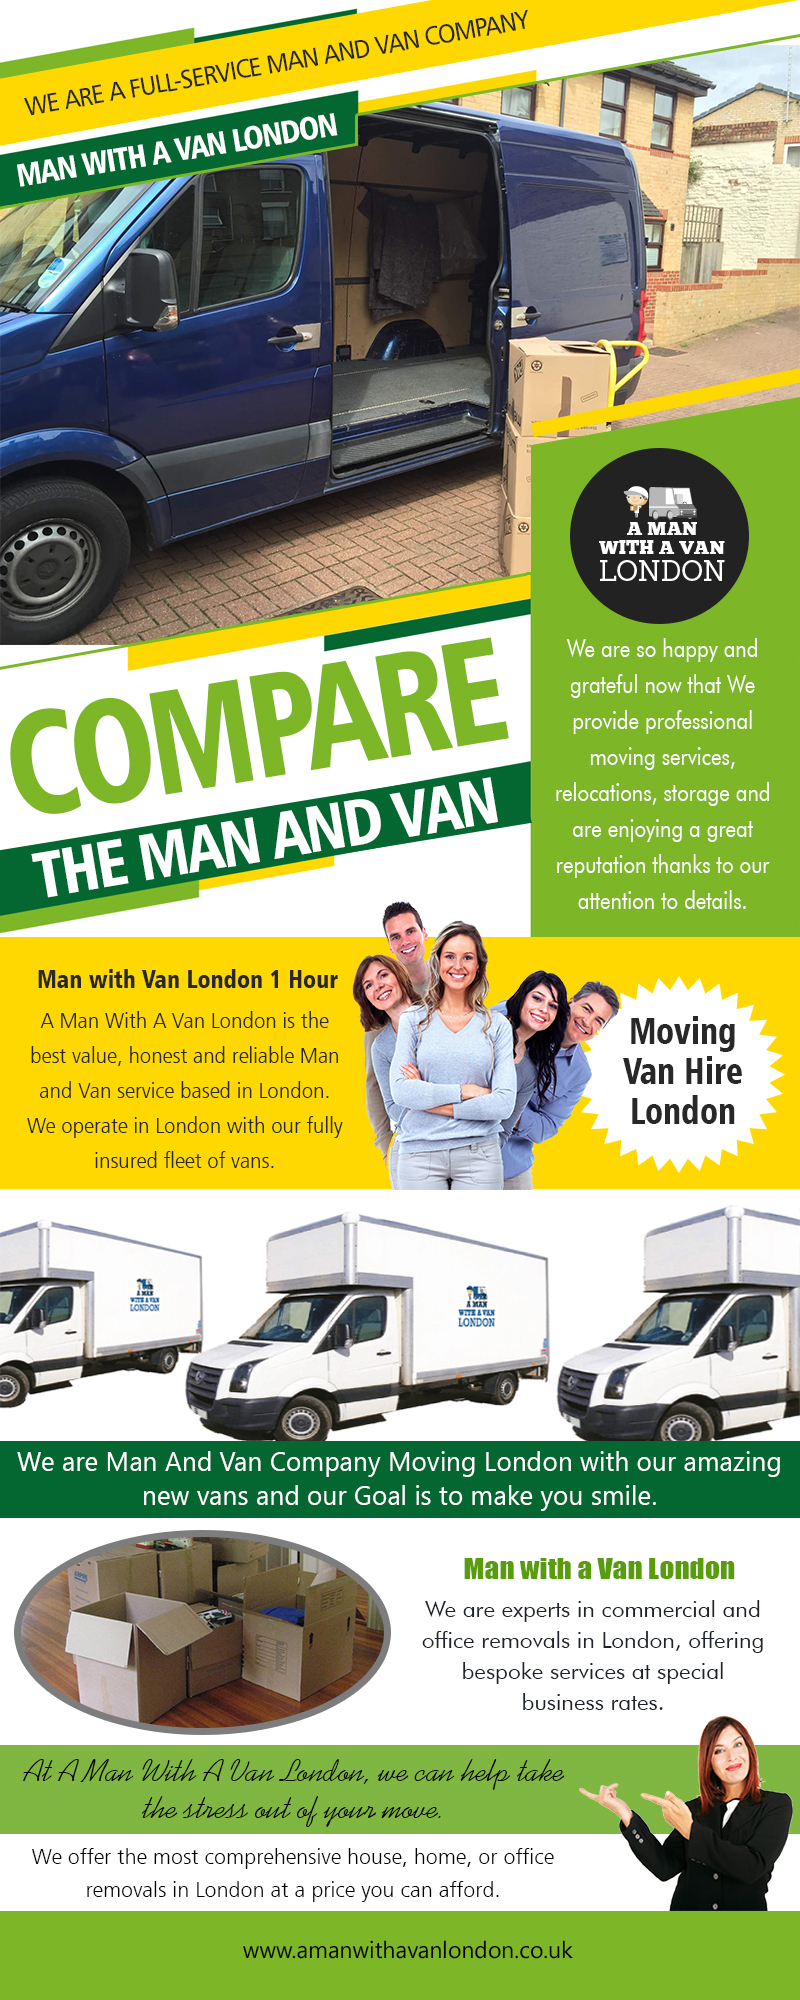 Compare The Man and Van